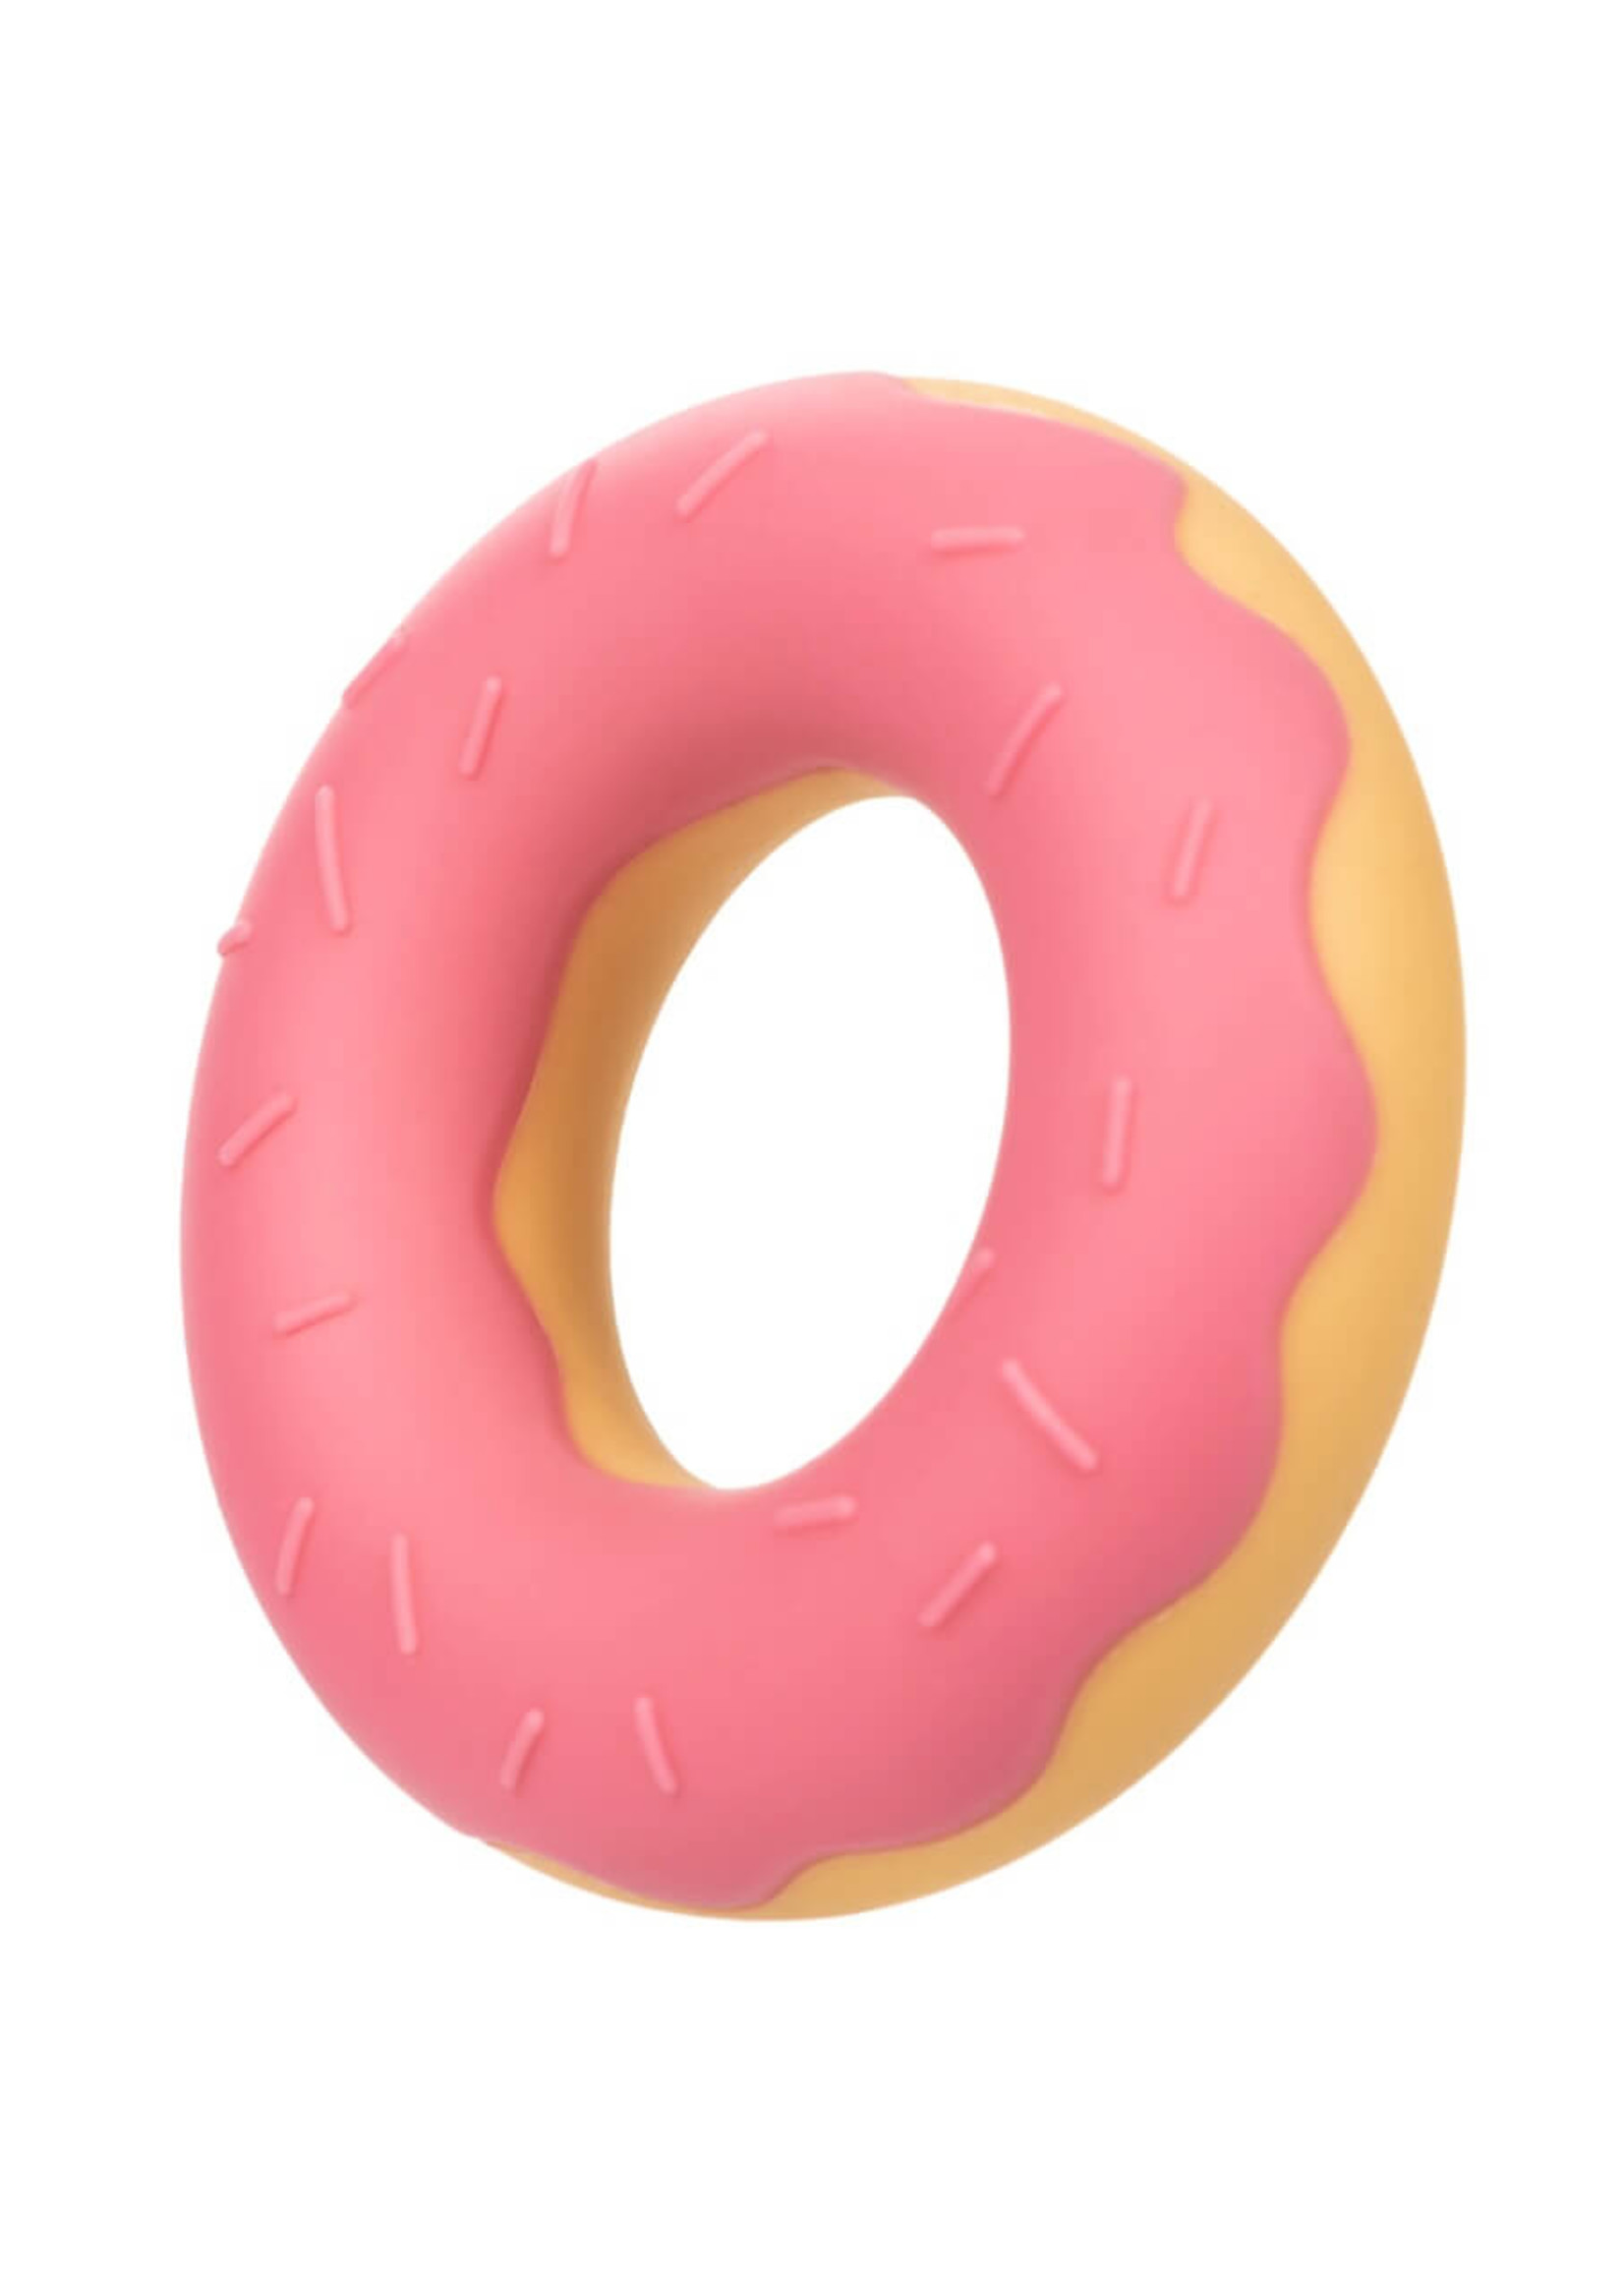 Cal Exotic Novelties Naughty Bits Dickin’ Donuts Silicone Donut Cock Ring